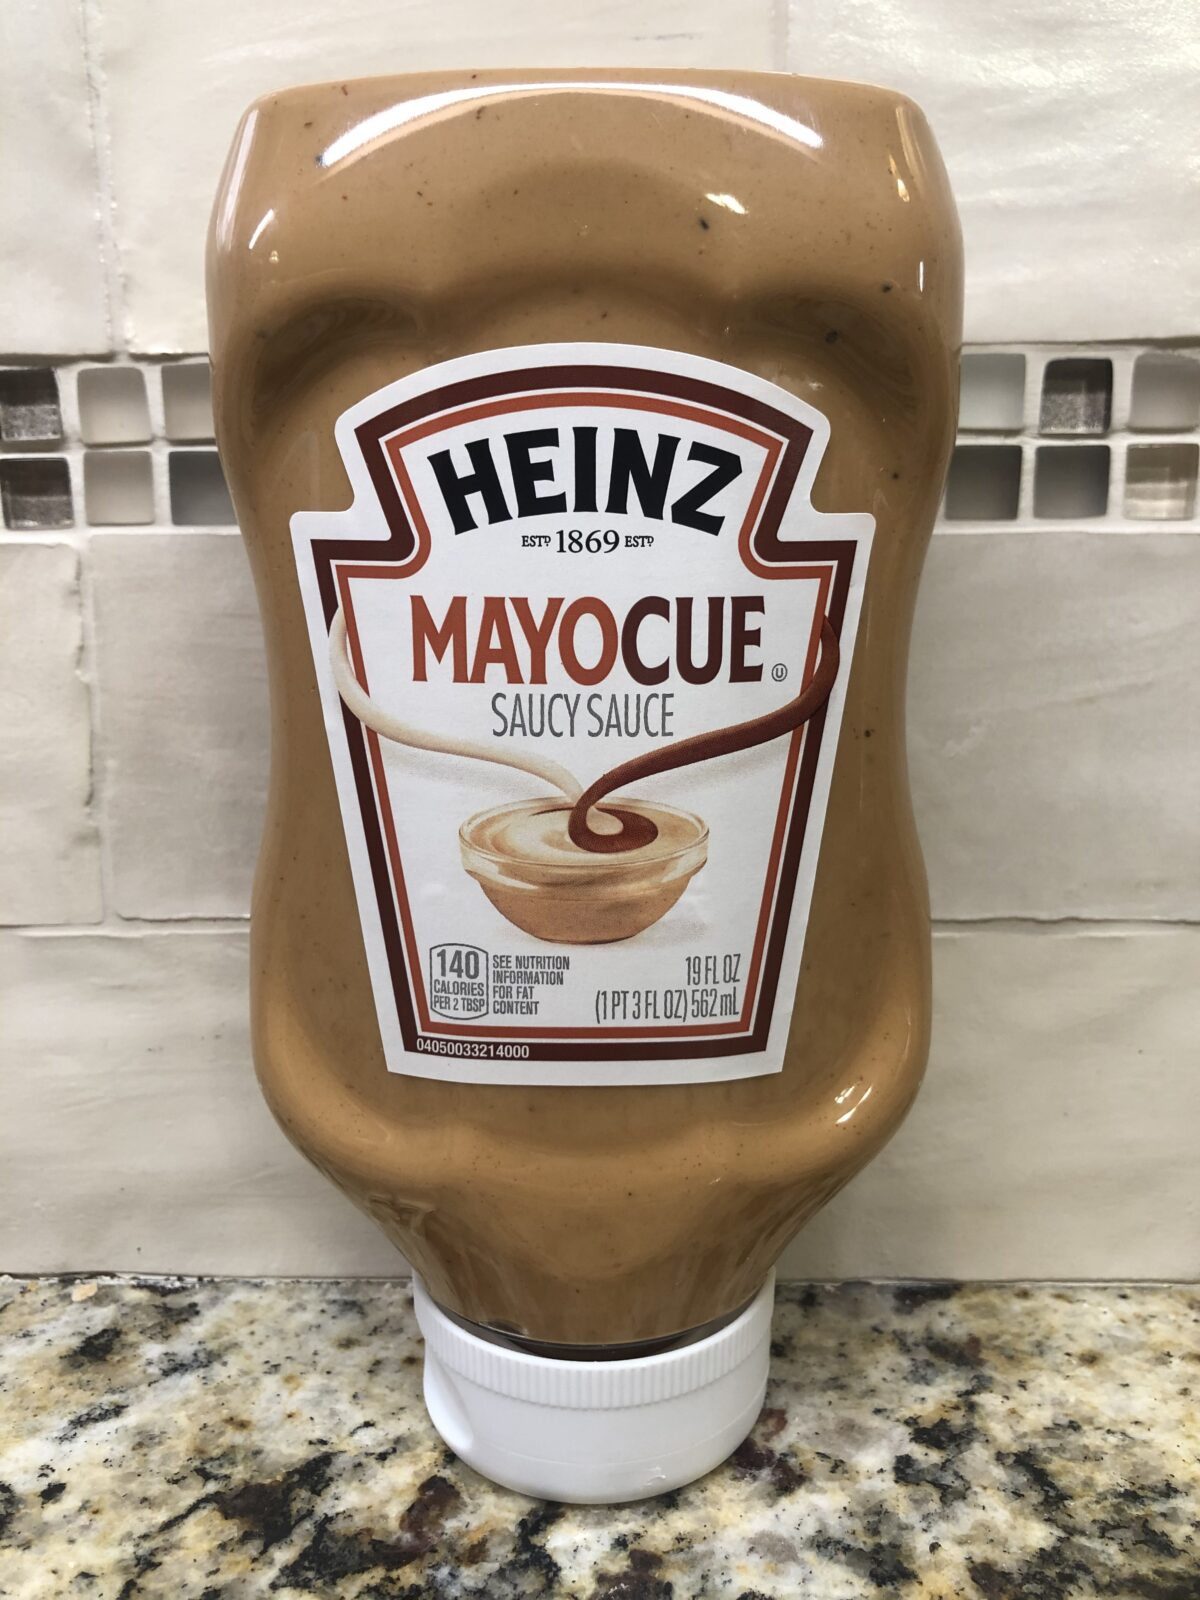 4 BOTTLES Heinz Mayoque Mayonnaise & Barbeque Sauce Mix 16.5 oz Bottle ...